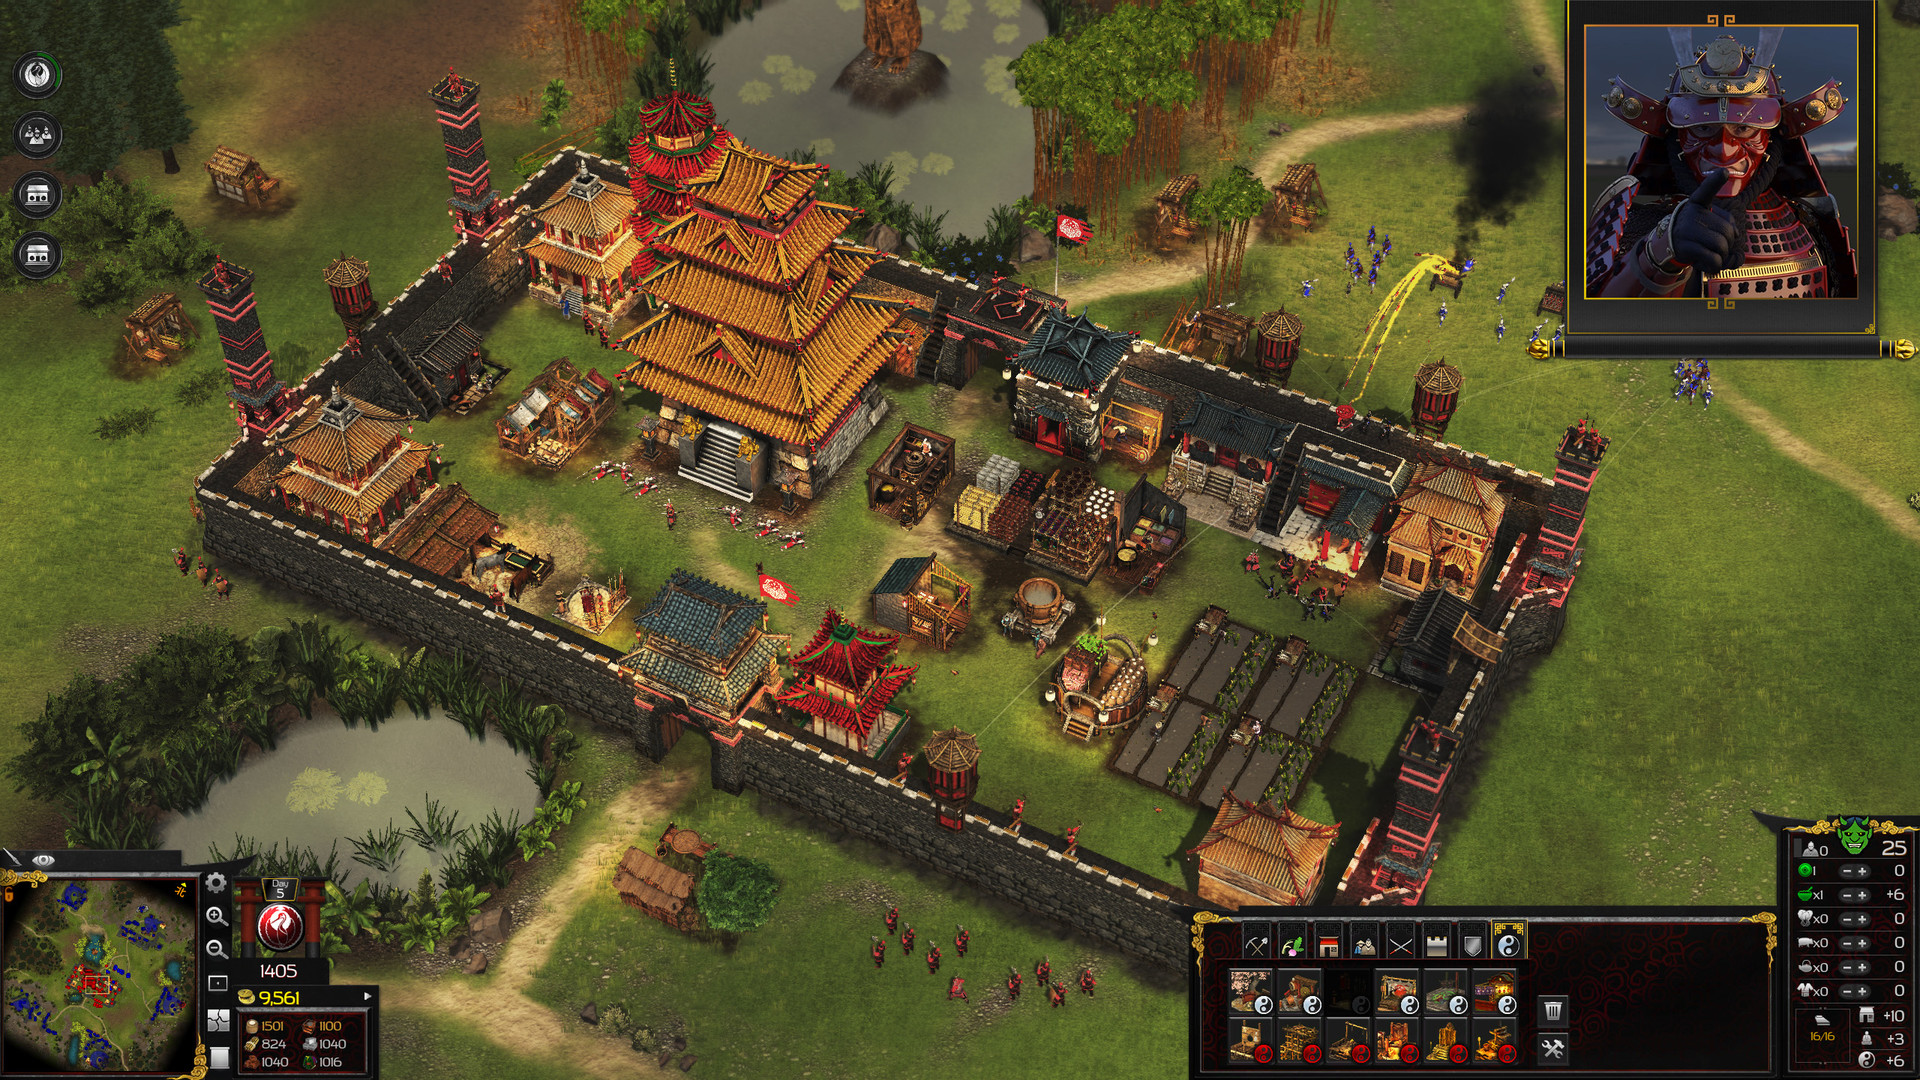 Stronghold: Warlords - Rise of the Shogun Campaign Featured Screenshot #1